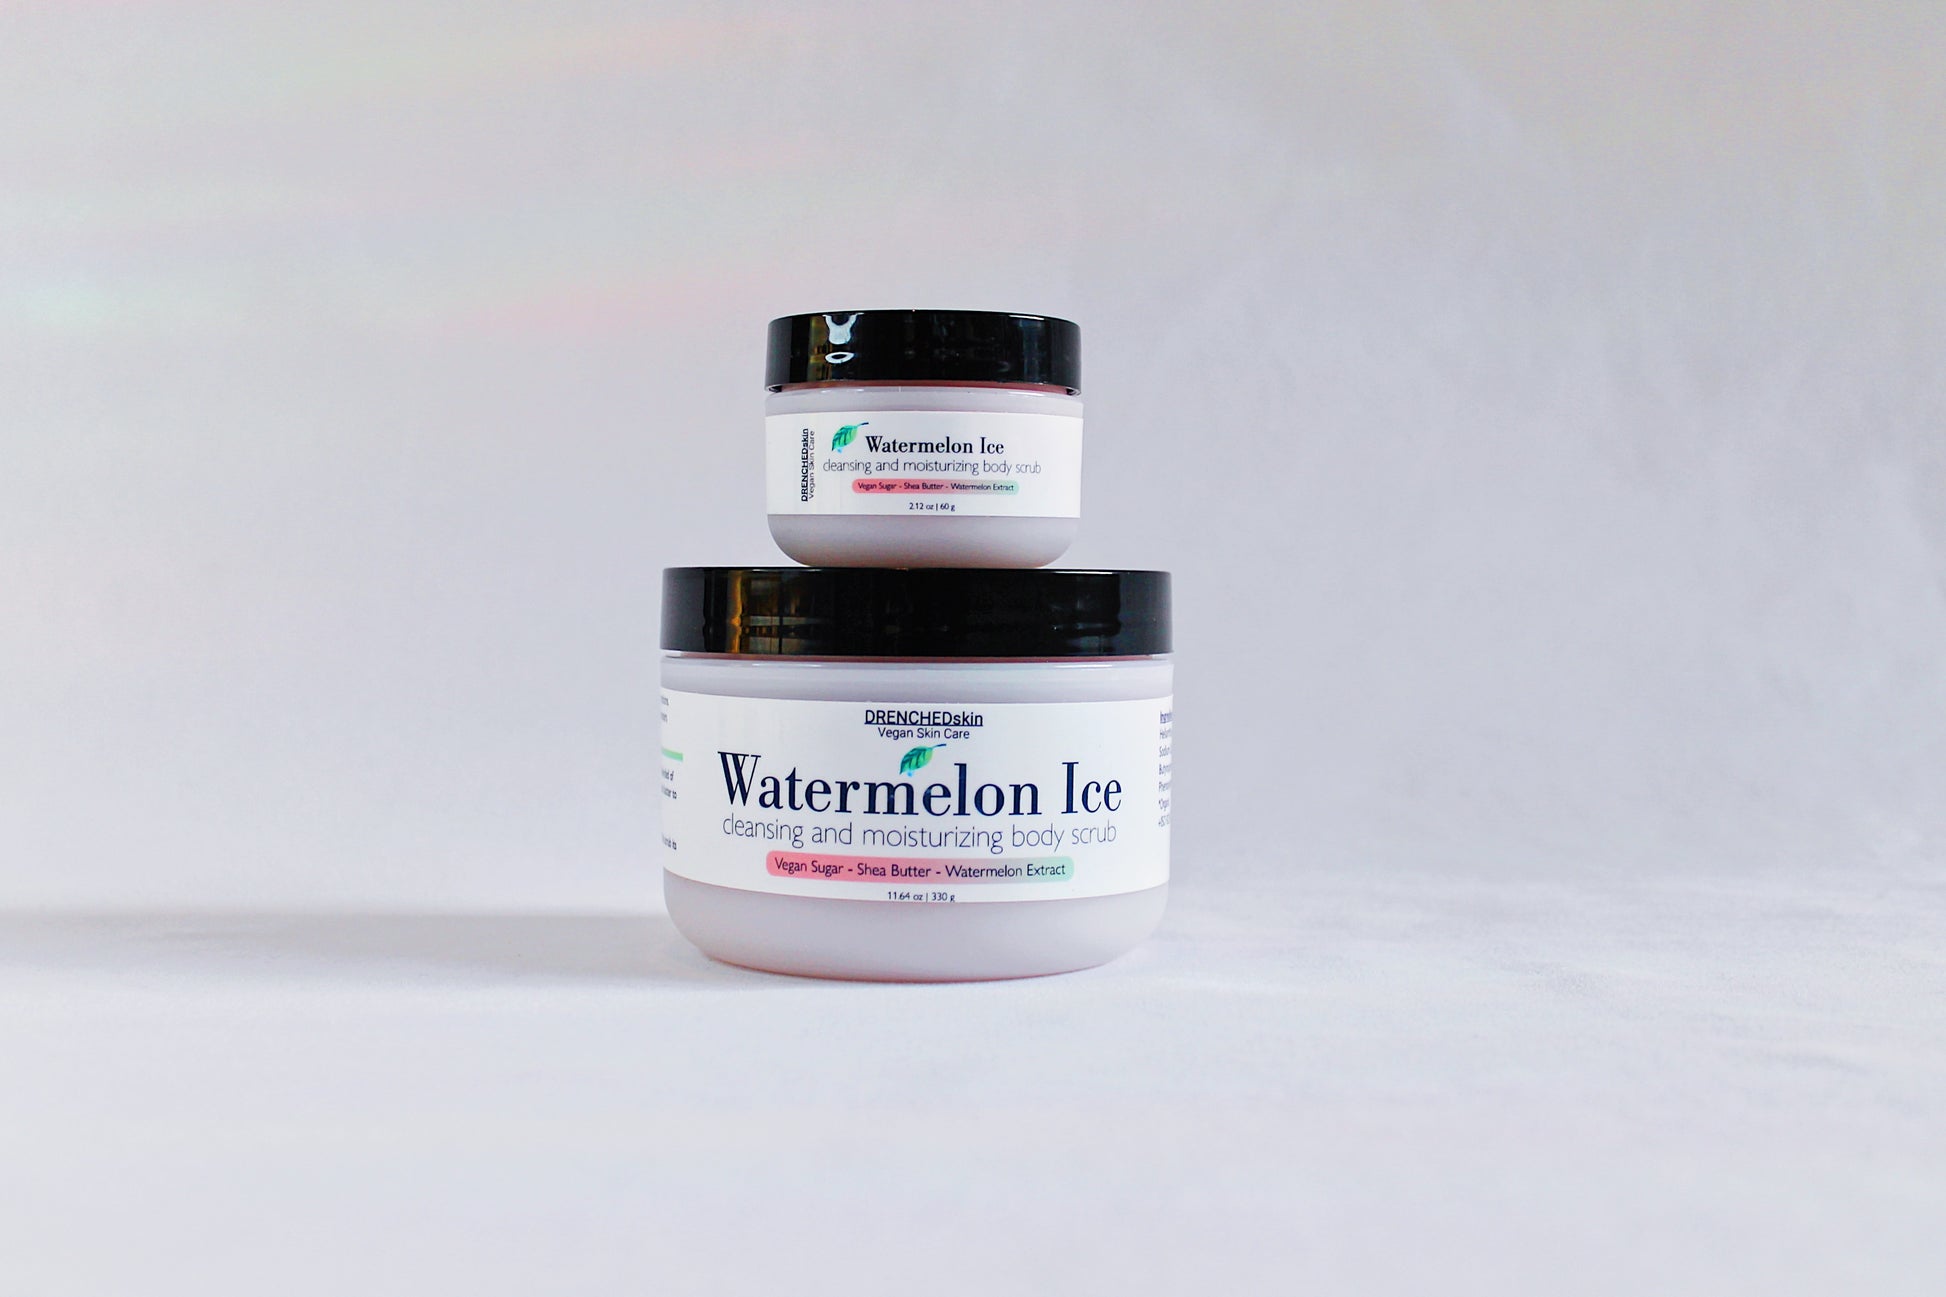 WATERMELON ICE Cleansing and Moisturizing Body Scrub - DRENCHEDskin®